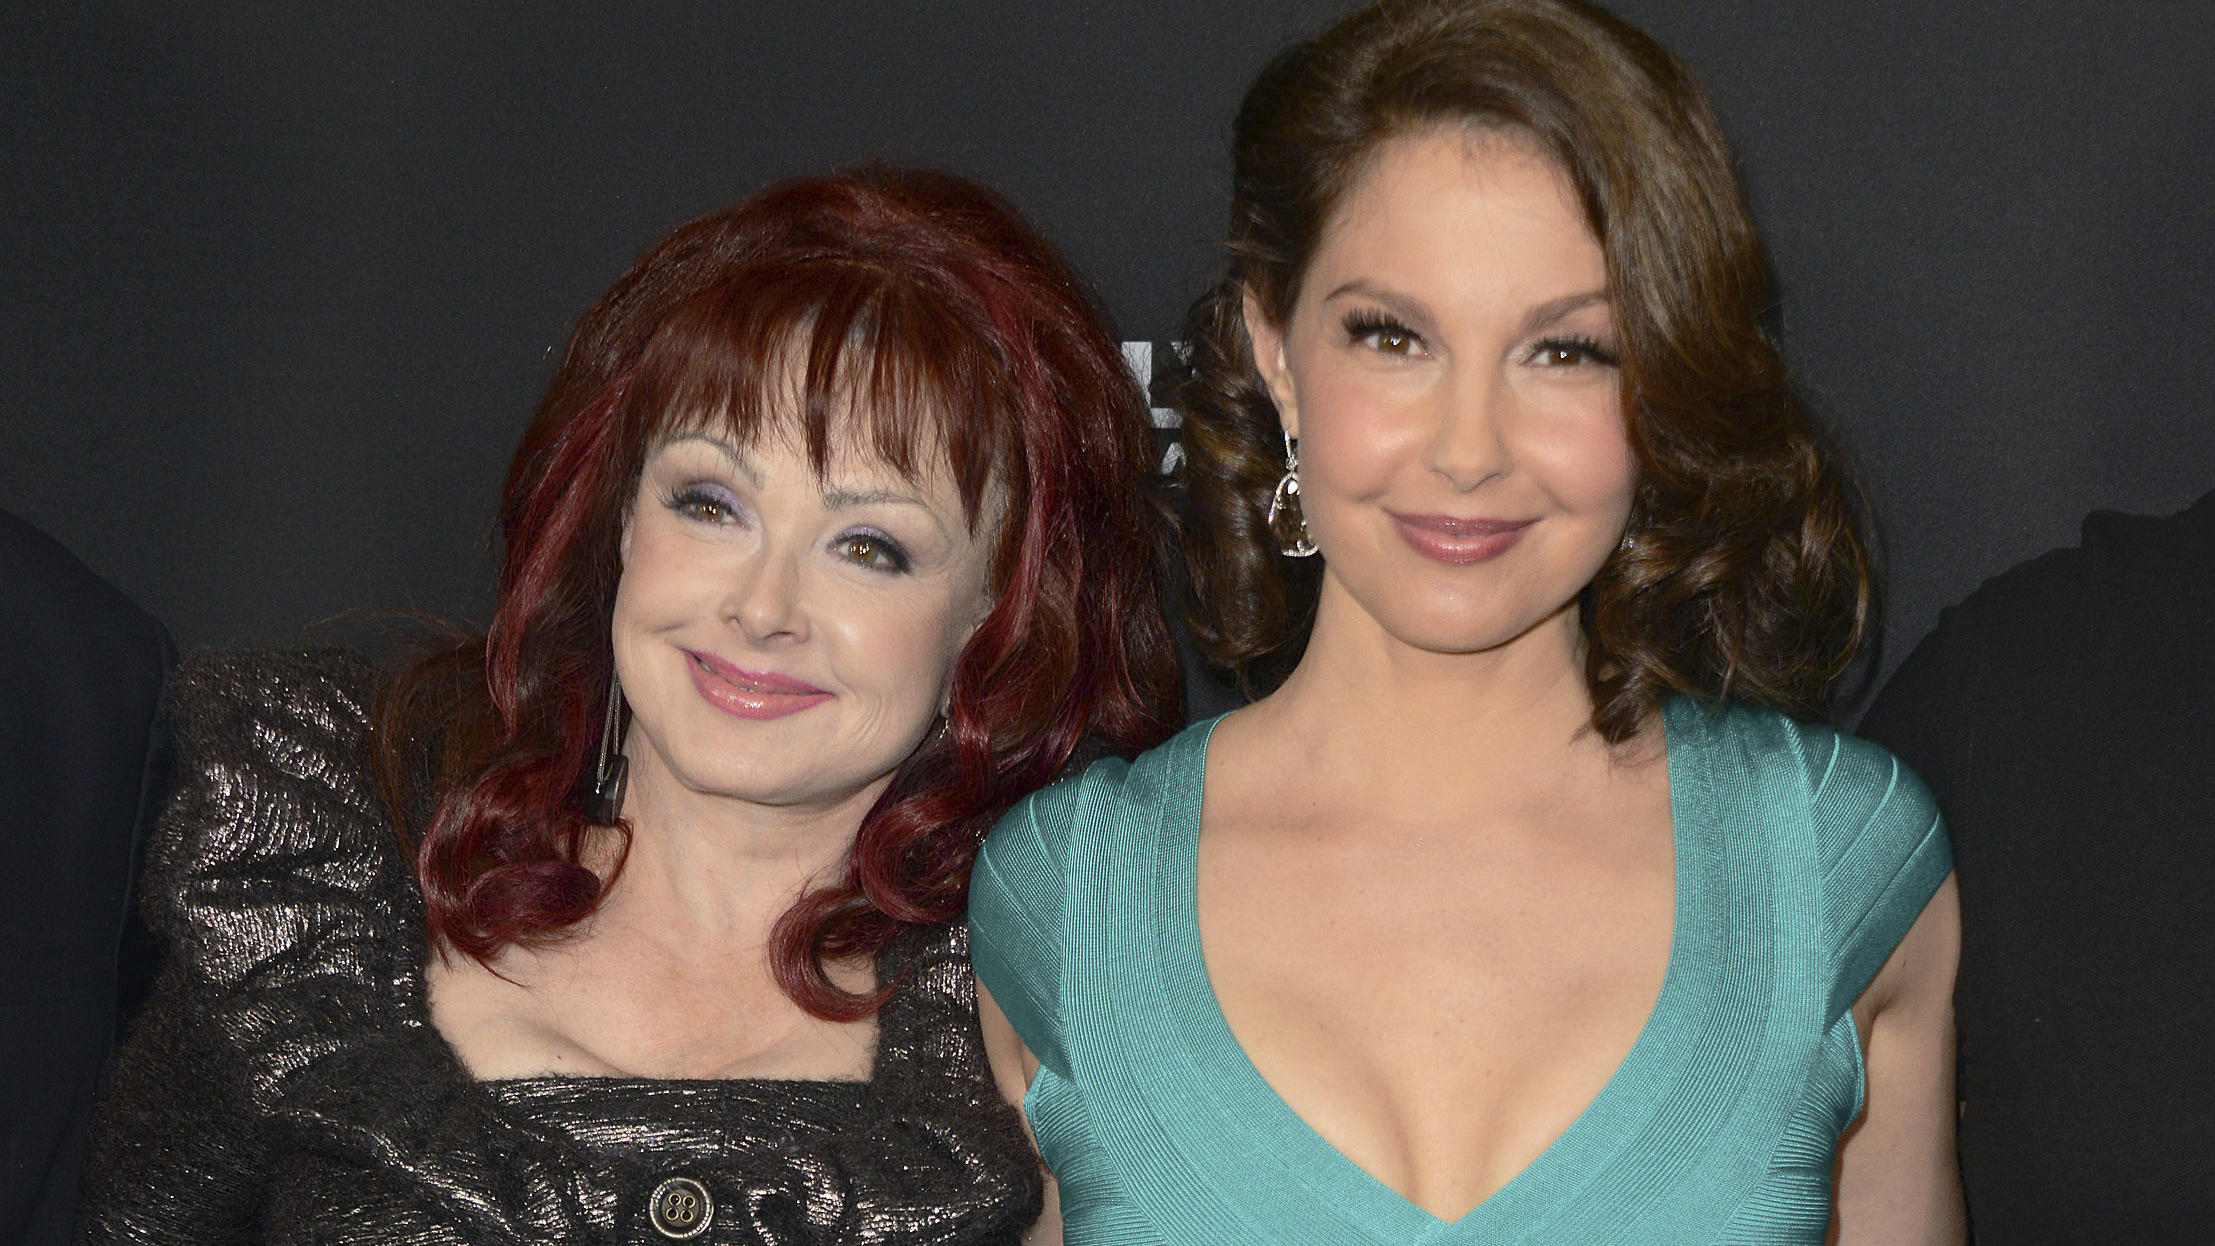 FILE - Naomi Judd, left, and Ashley Judd arrive at the LA premiere of "Olympus Has Fallen" in Los Angeles on March 18, 2013. Ashley Judd encouraged people to seek help for their mental health after the loss of her mother, country star Naomi Judd. In 